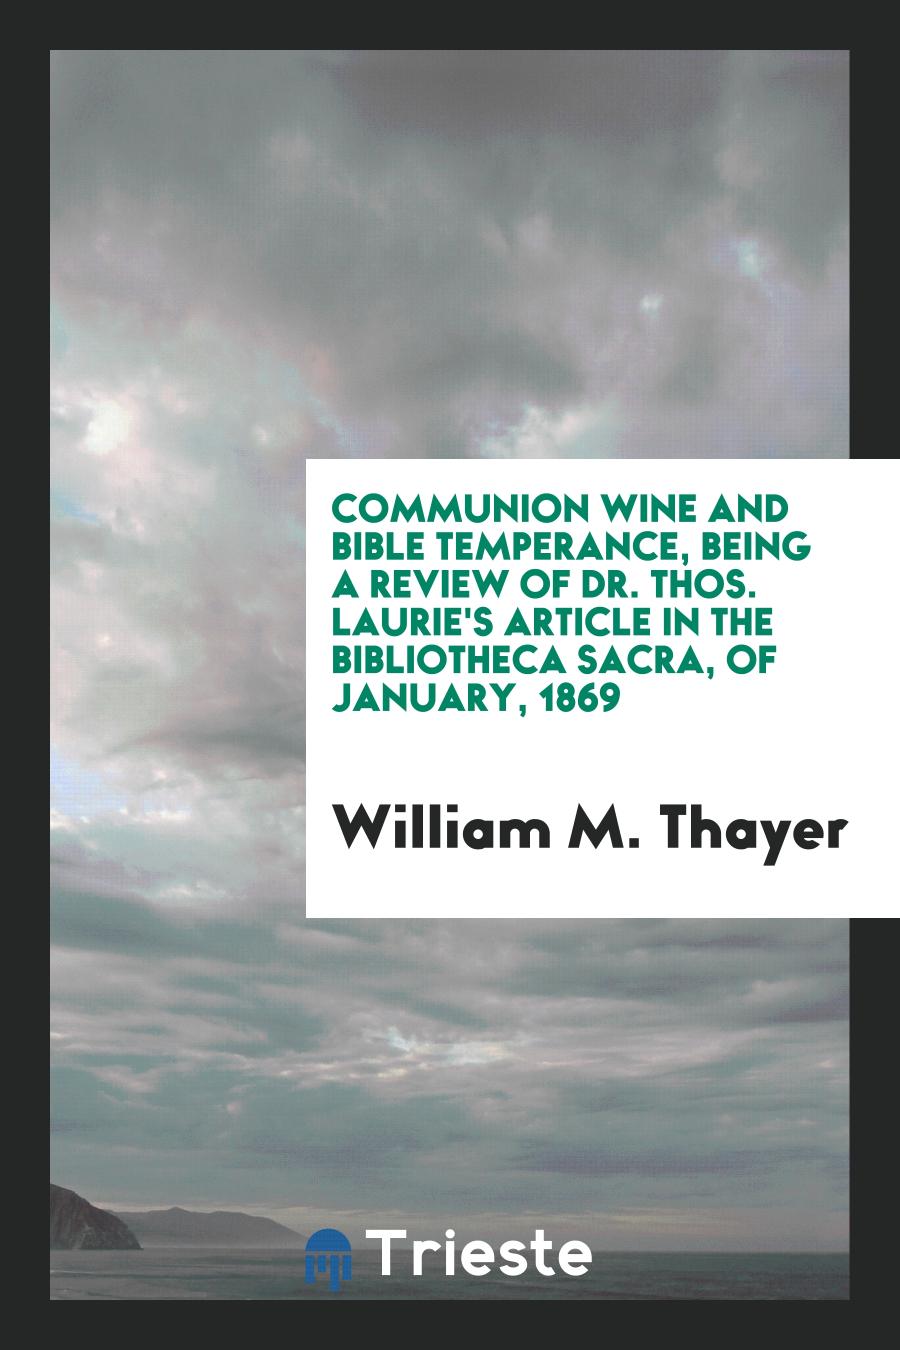 Communion Wine and Bible Temperance, being a review of Dr. Thos. Laurie's Article in the Bibliotheca Sacra, of January, 1869